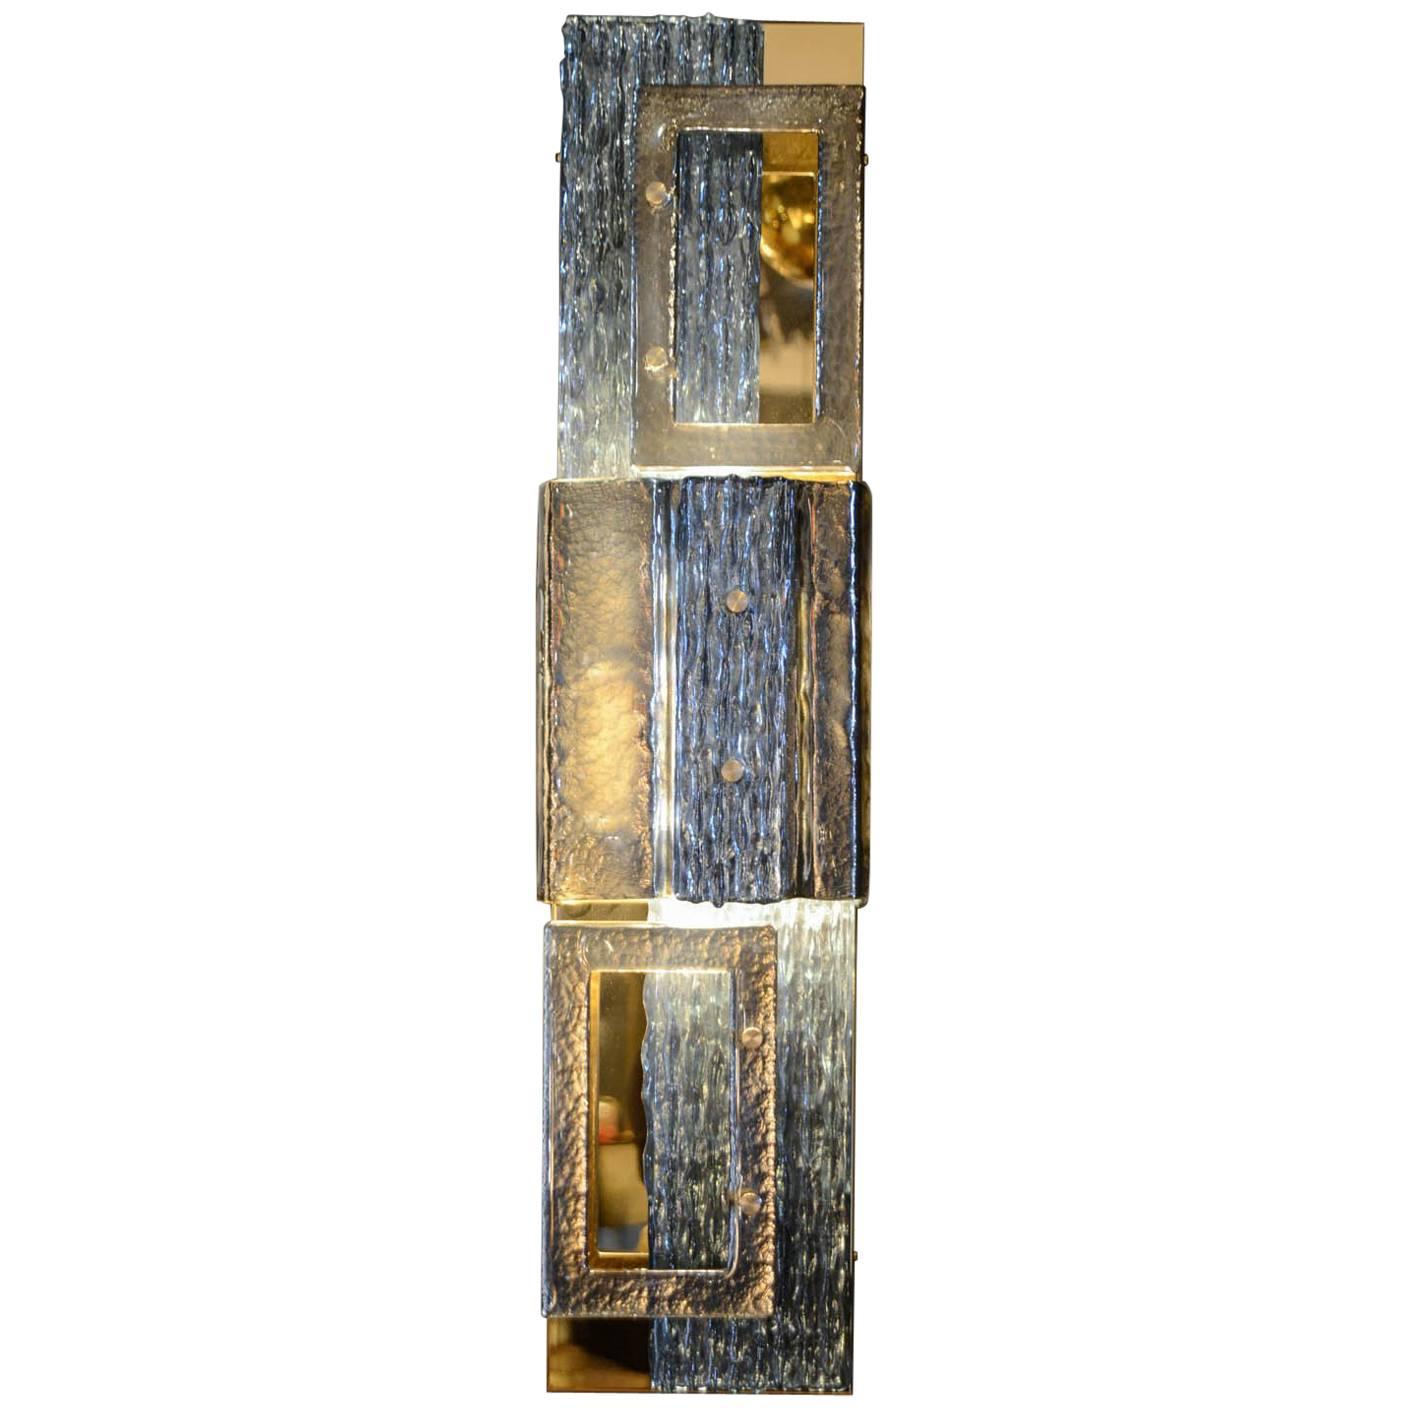 Glustin Luminaires Creation Brass and Murano Glass Panels For Sale